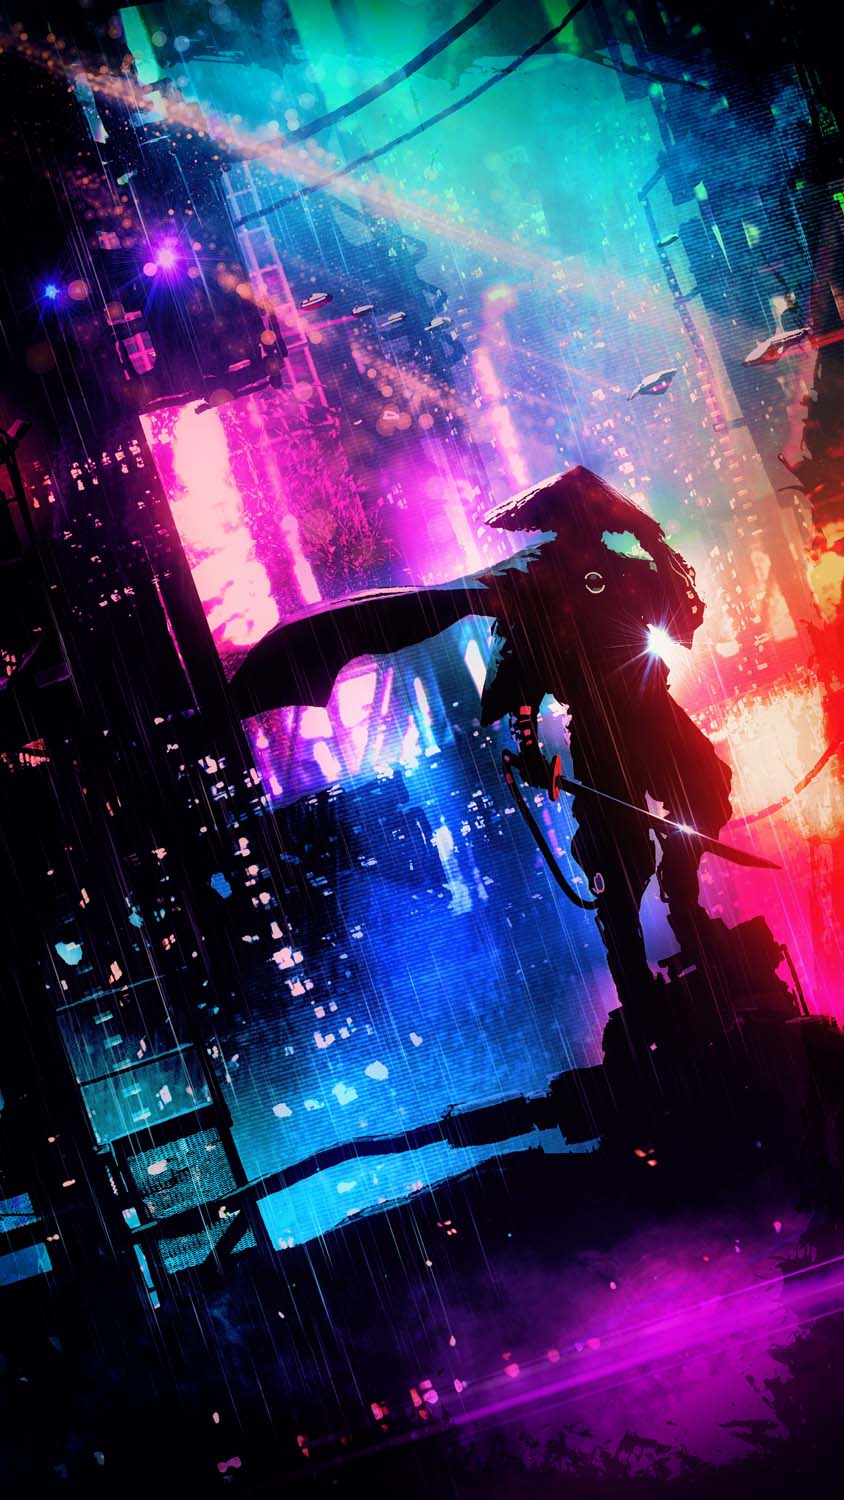 Cyberpunk 2077 wallpaper for iPhone with resolution 1080x1920 pixel. You can make this wallpaper for your iPhone 5, 6, 7, 8, X backgrounds, Mobile Screensaver, or iPad Lock Screen - Samurai